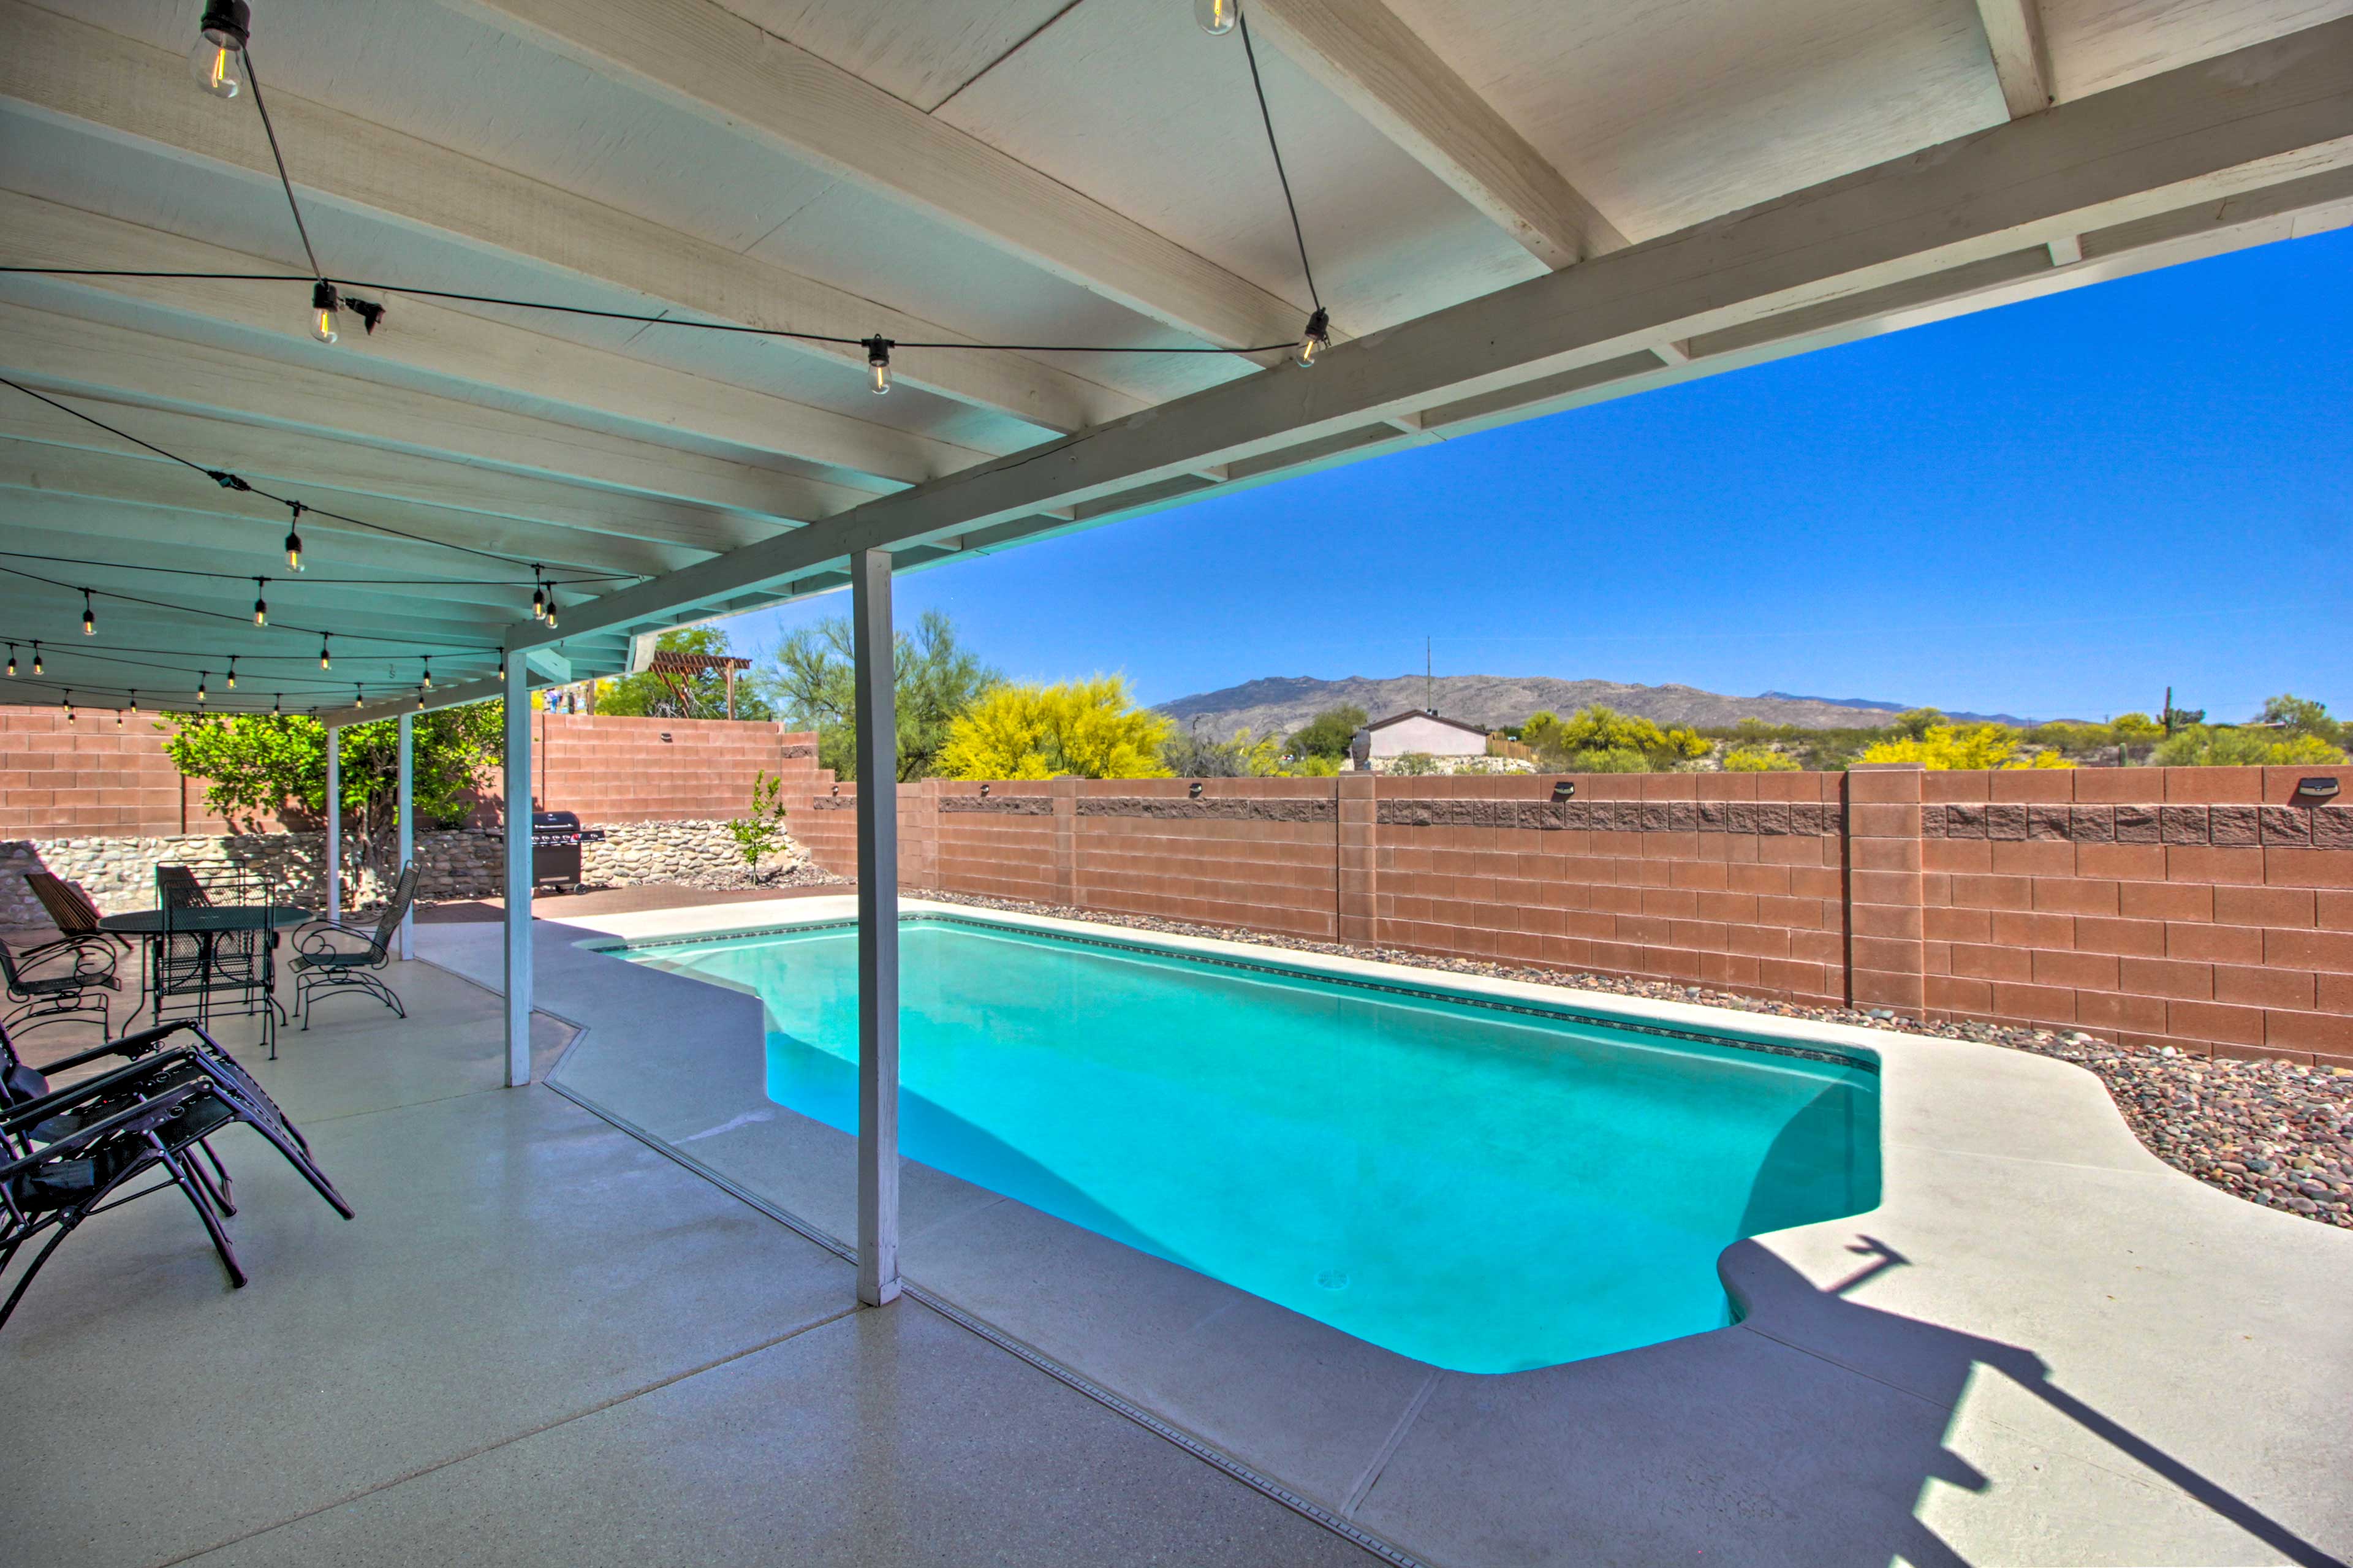 Private Pool (Depth 4' - 9') | Fenced-In Backyard